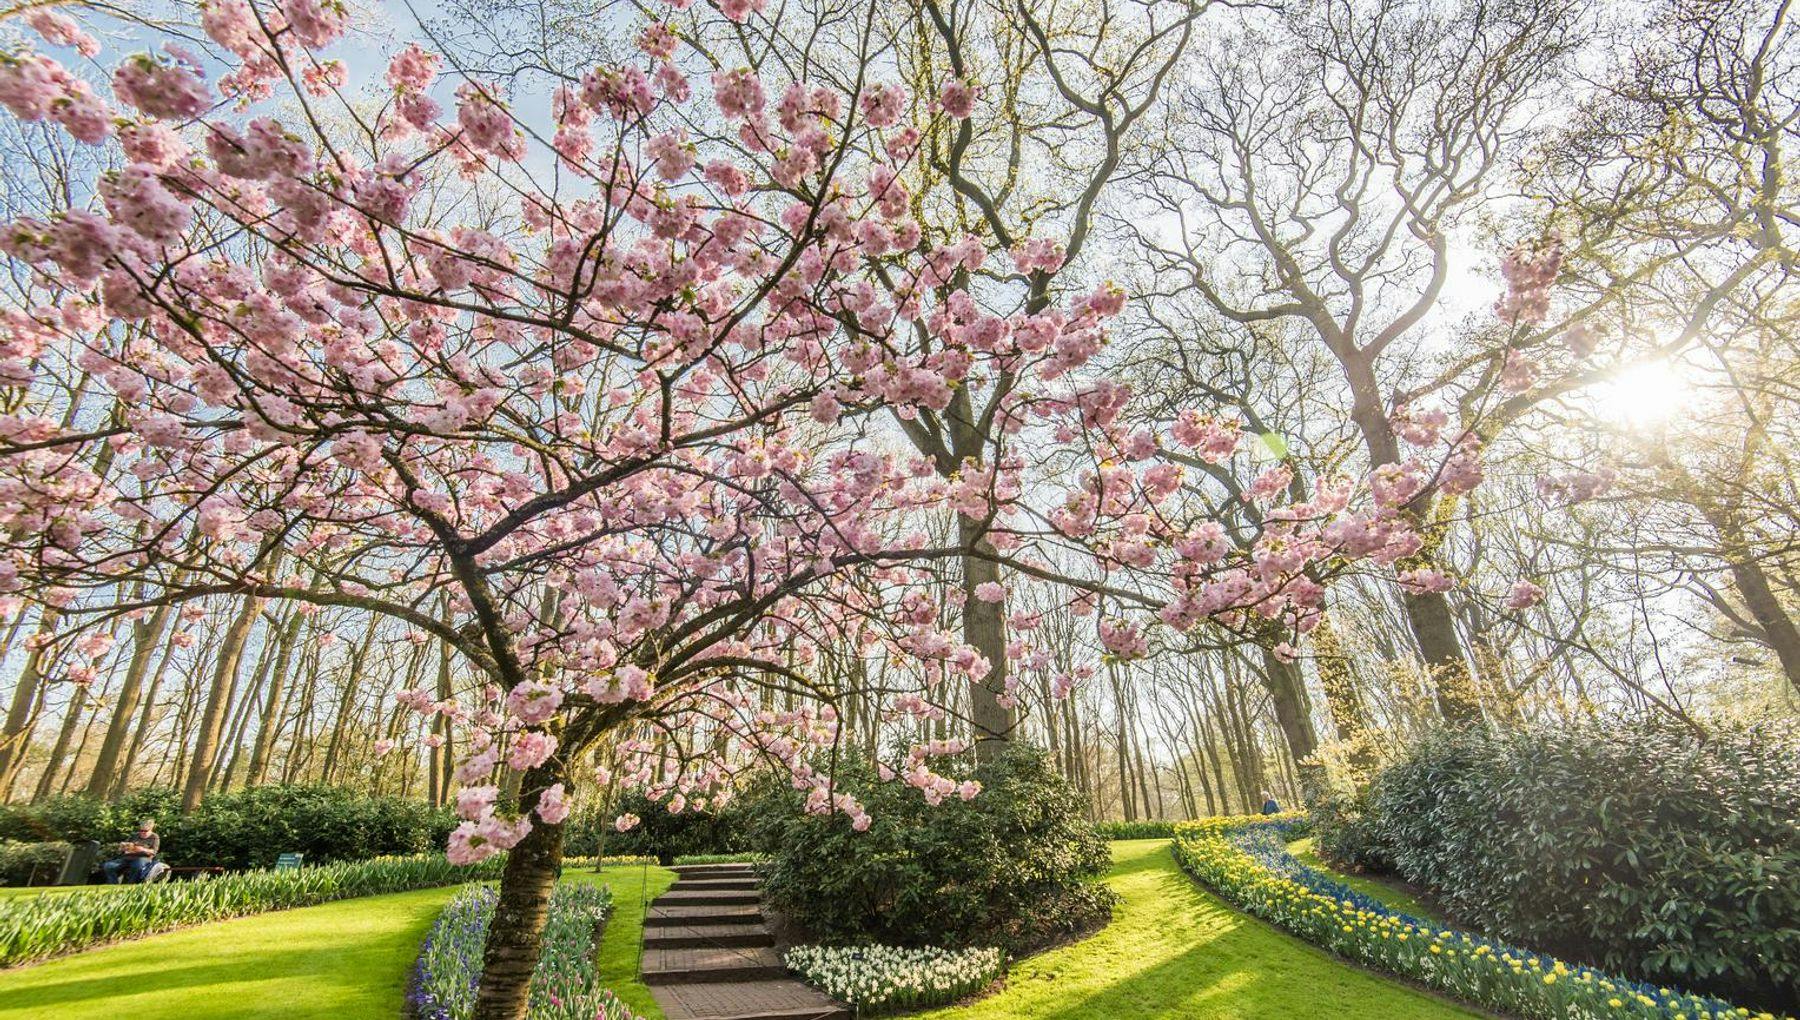 Keukenhof, also known as the Garden of Europe, is the world's second-largest flower garden. It is situated in Lisse, the Netherlands.
Blossoming tree.